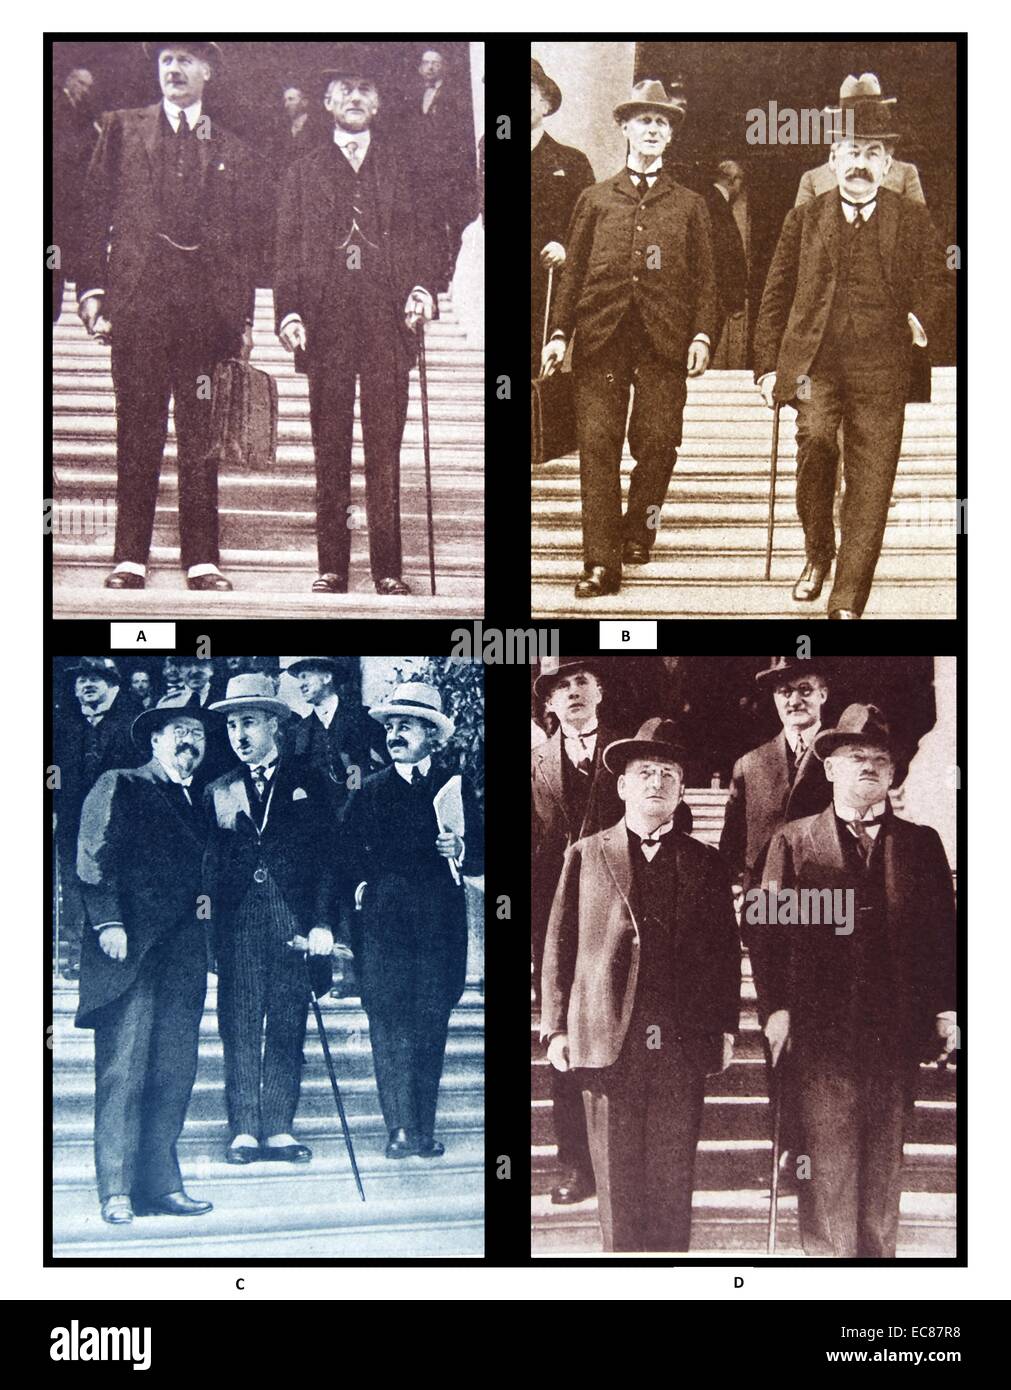 Photograph of delegates attending the Locarno Treaty Conference. (A) Austen Chamberlain; (B) Aristide Briand; (C) Belgian Ambassador Vanderville; (D) Dr Luther and Herr Stresemann for Germany. Dated 1925 Stock Photo